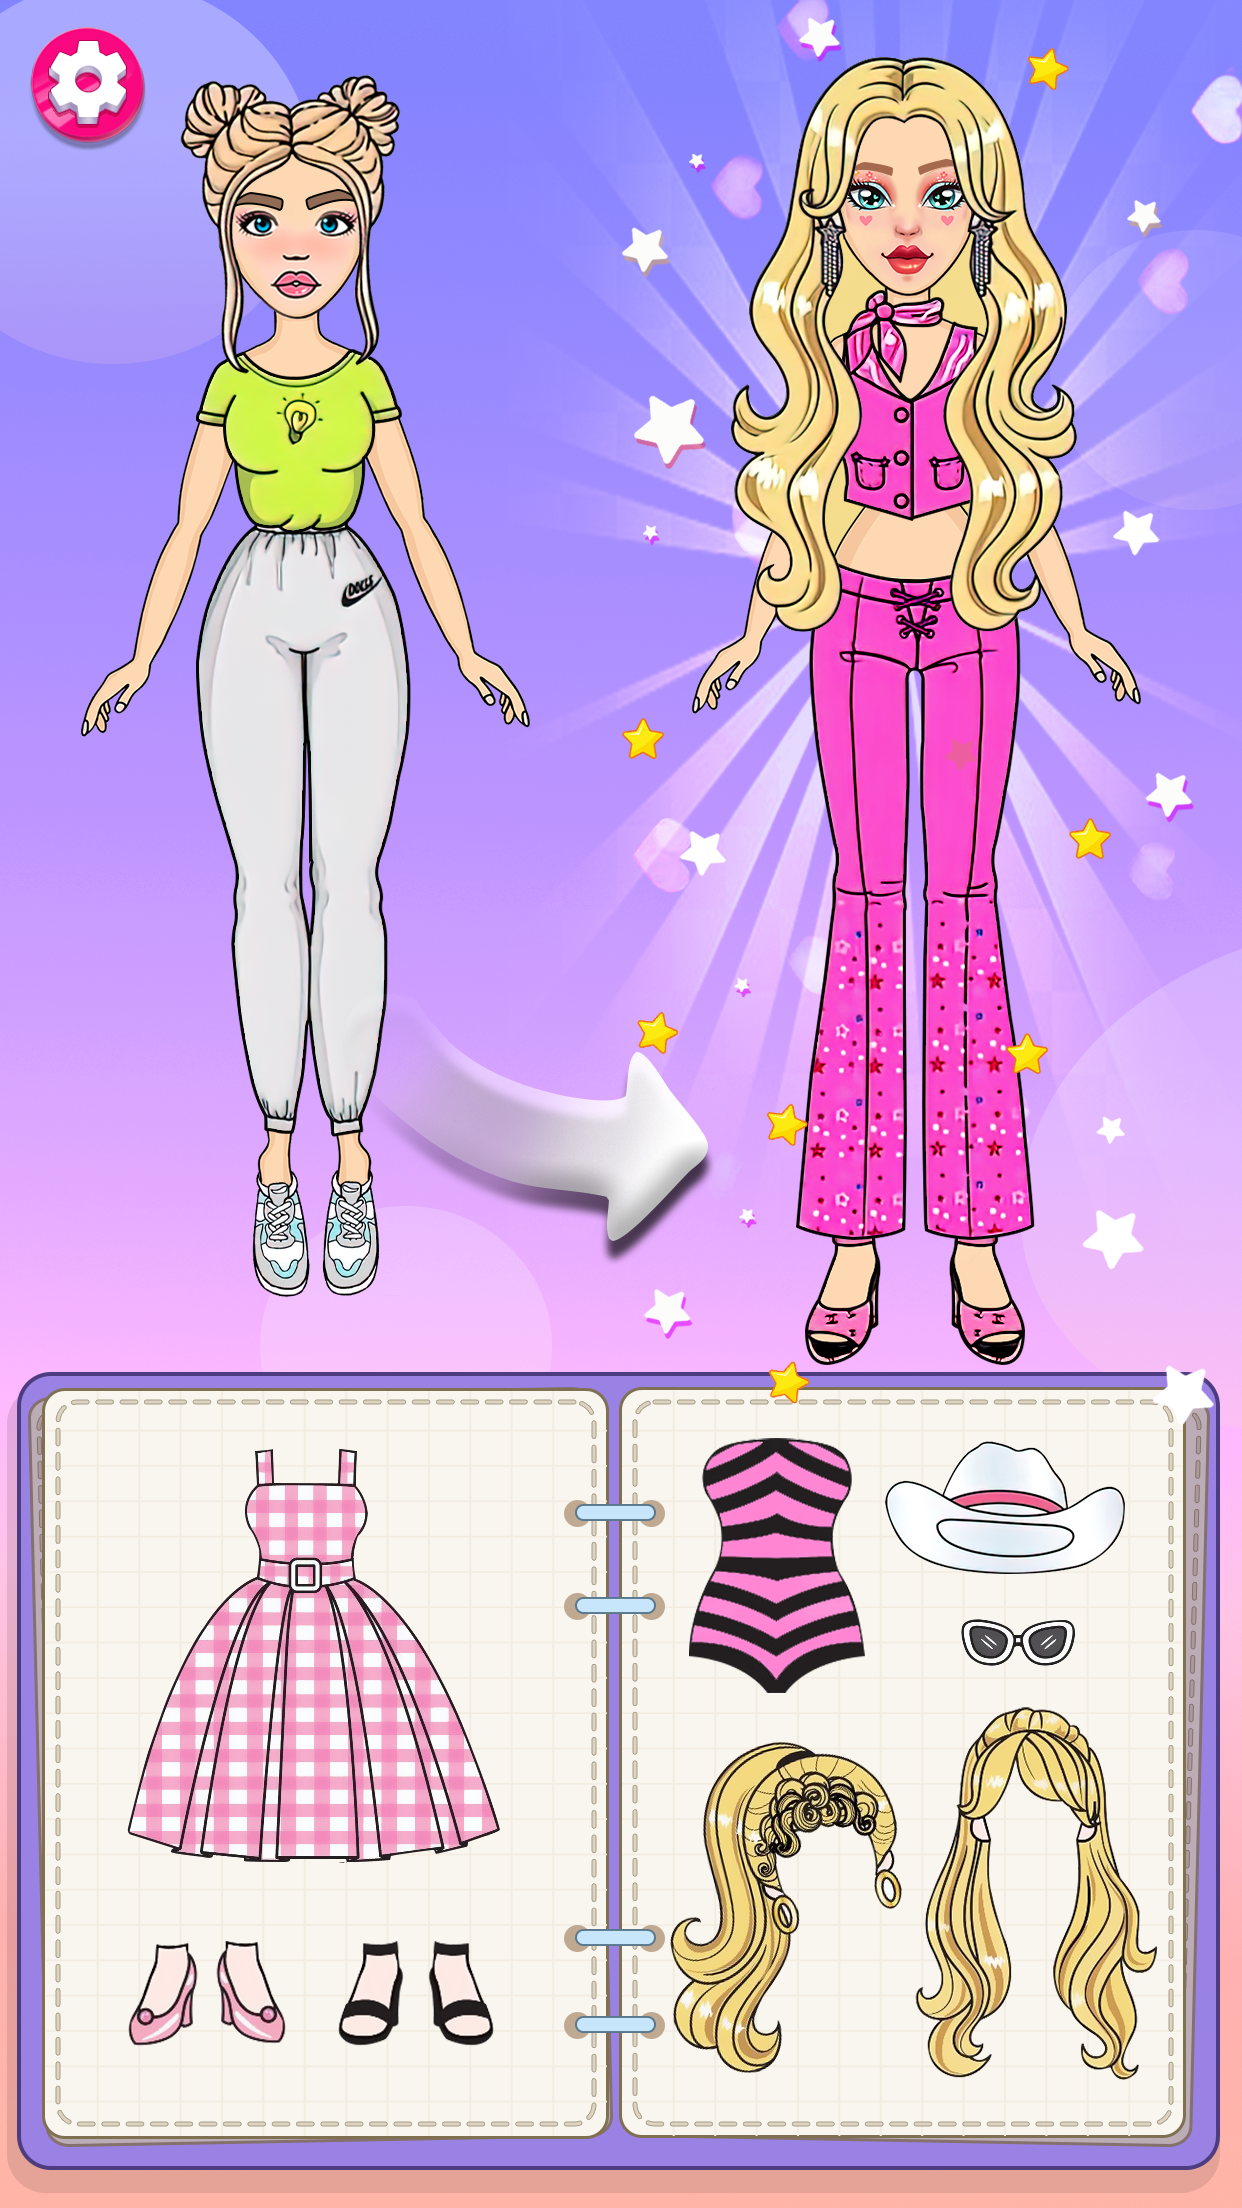 Emotion Dress-Up Paper Doll: Colour Your Own | Adventure in a Box